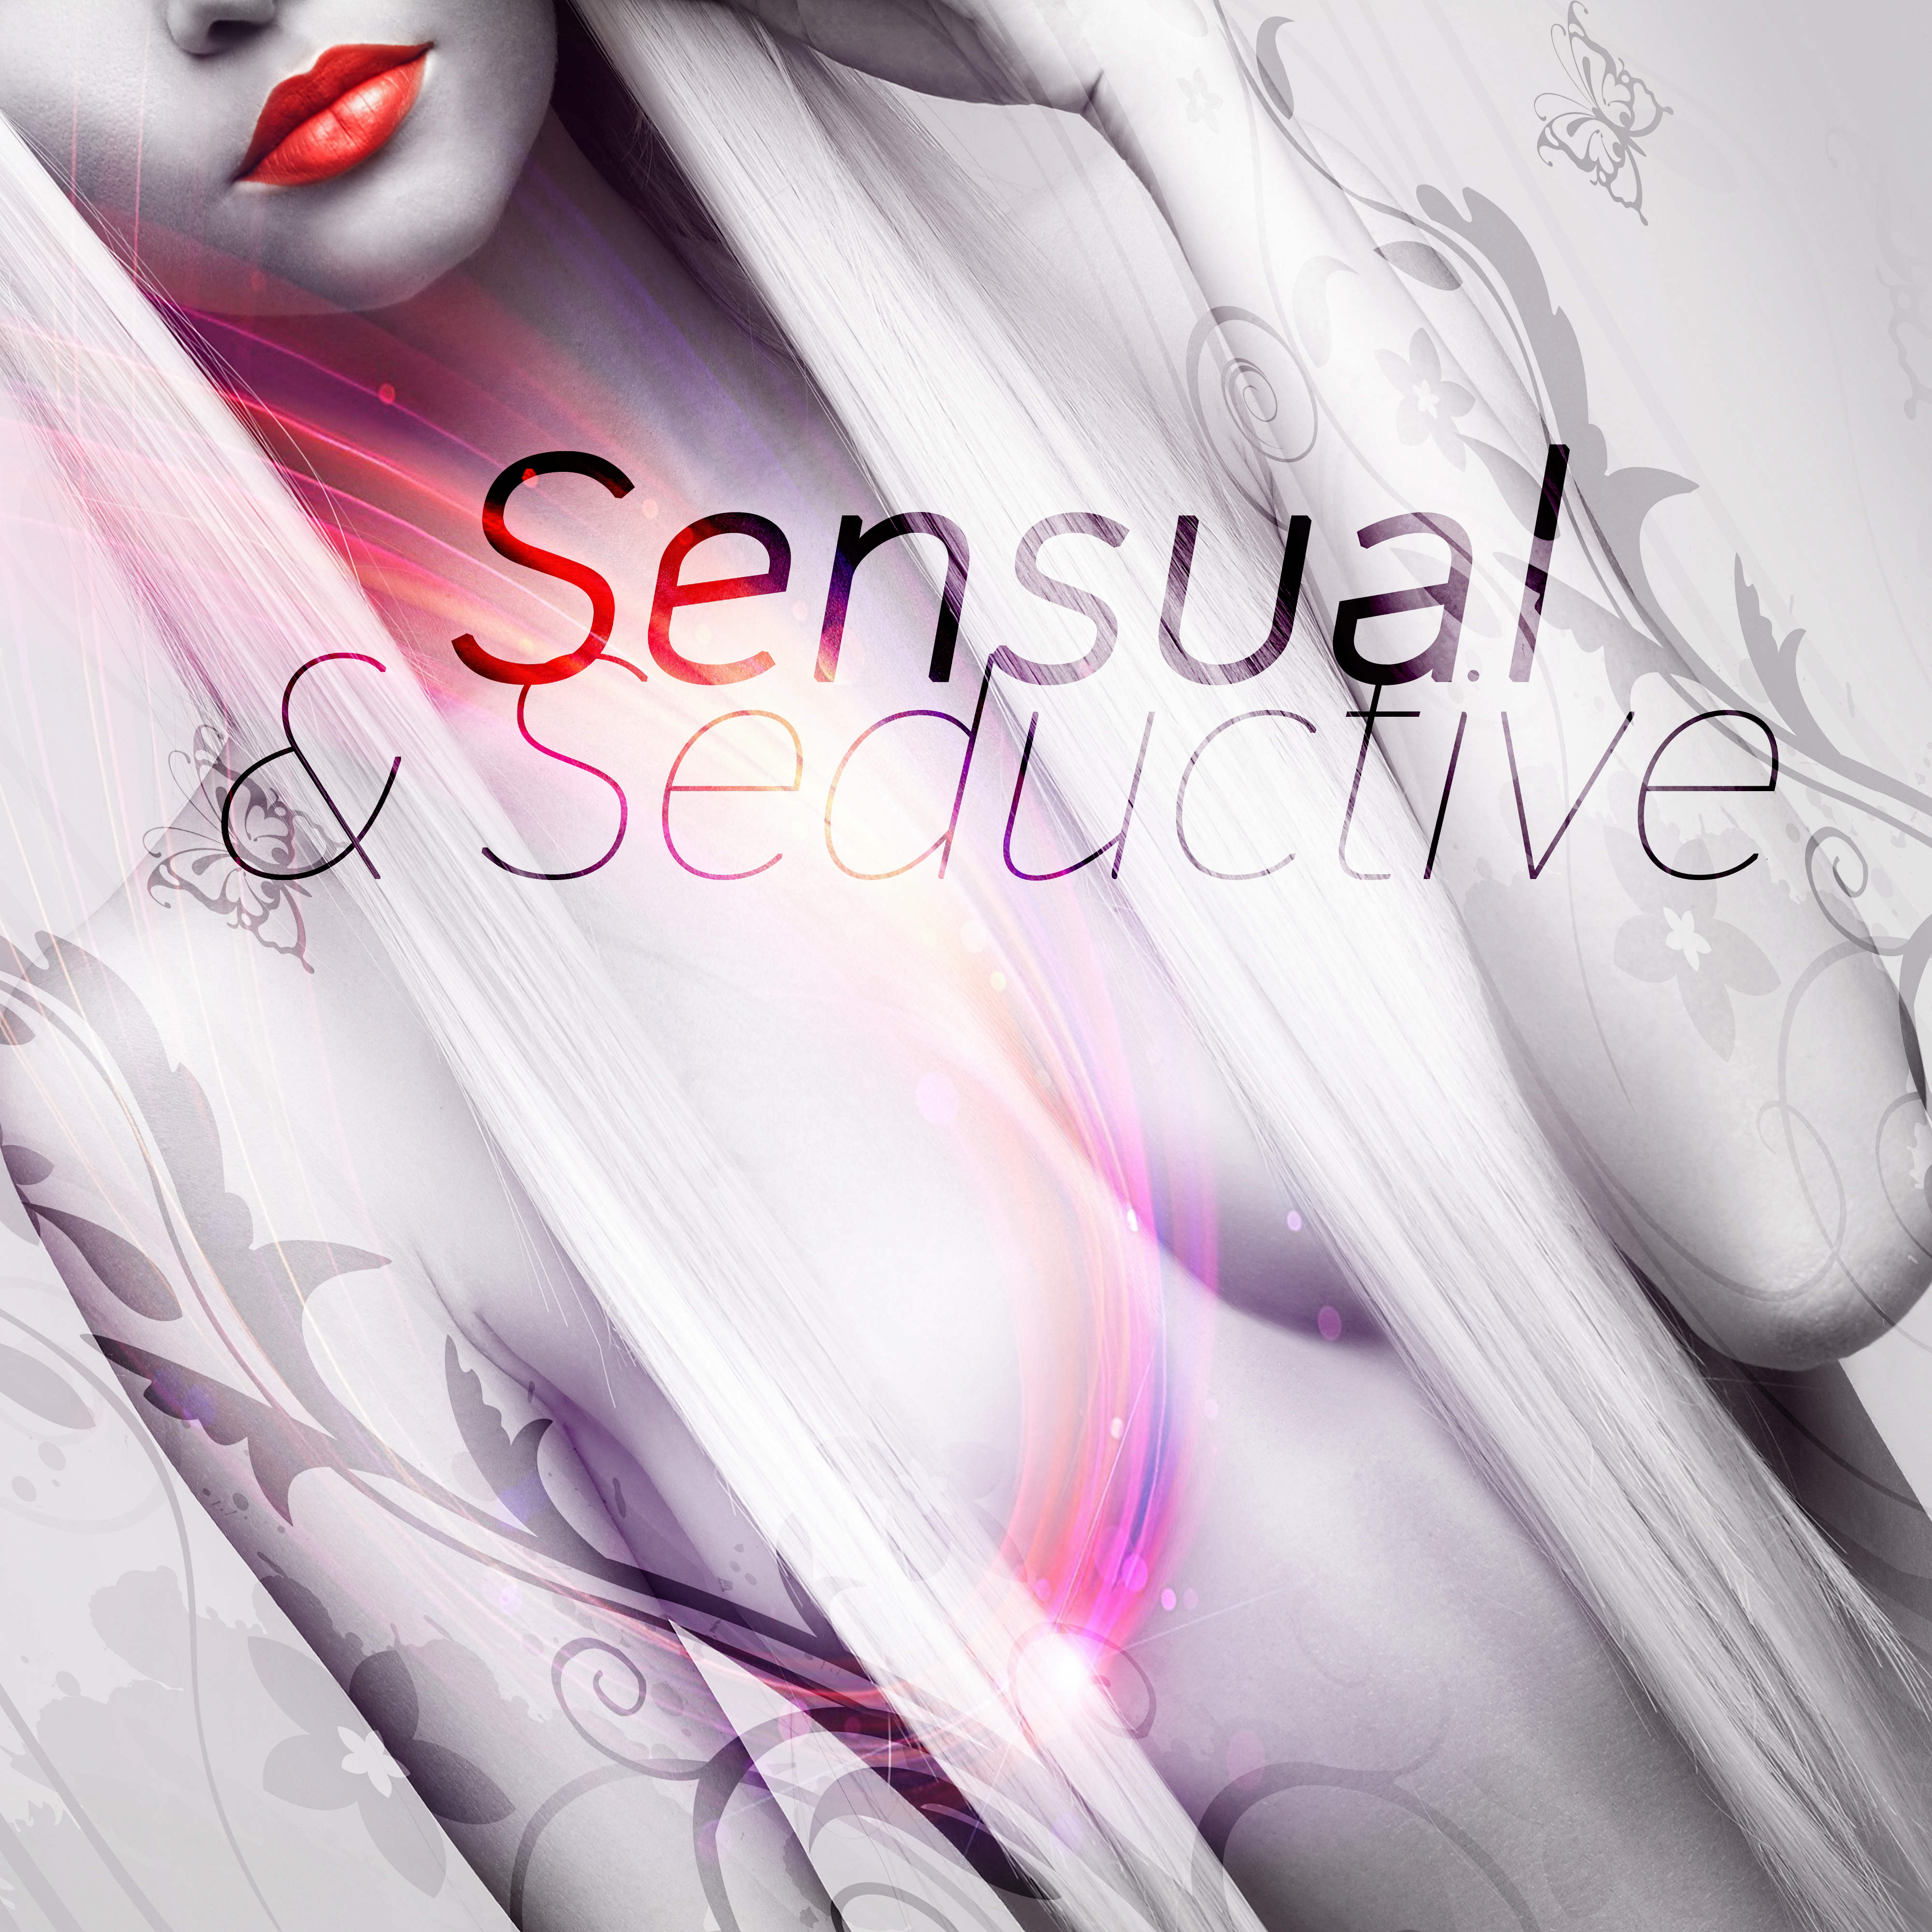 Sensual  Seductive  Erotic Lounge Chillout Songs for Tantra Intimate Moments, Hot Foreplay, French Kiss, Passionate  Background Music